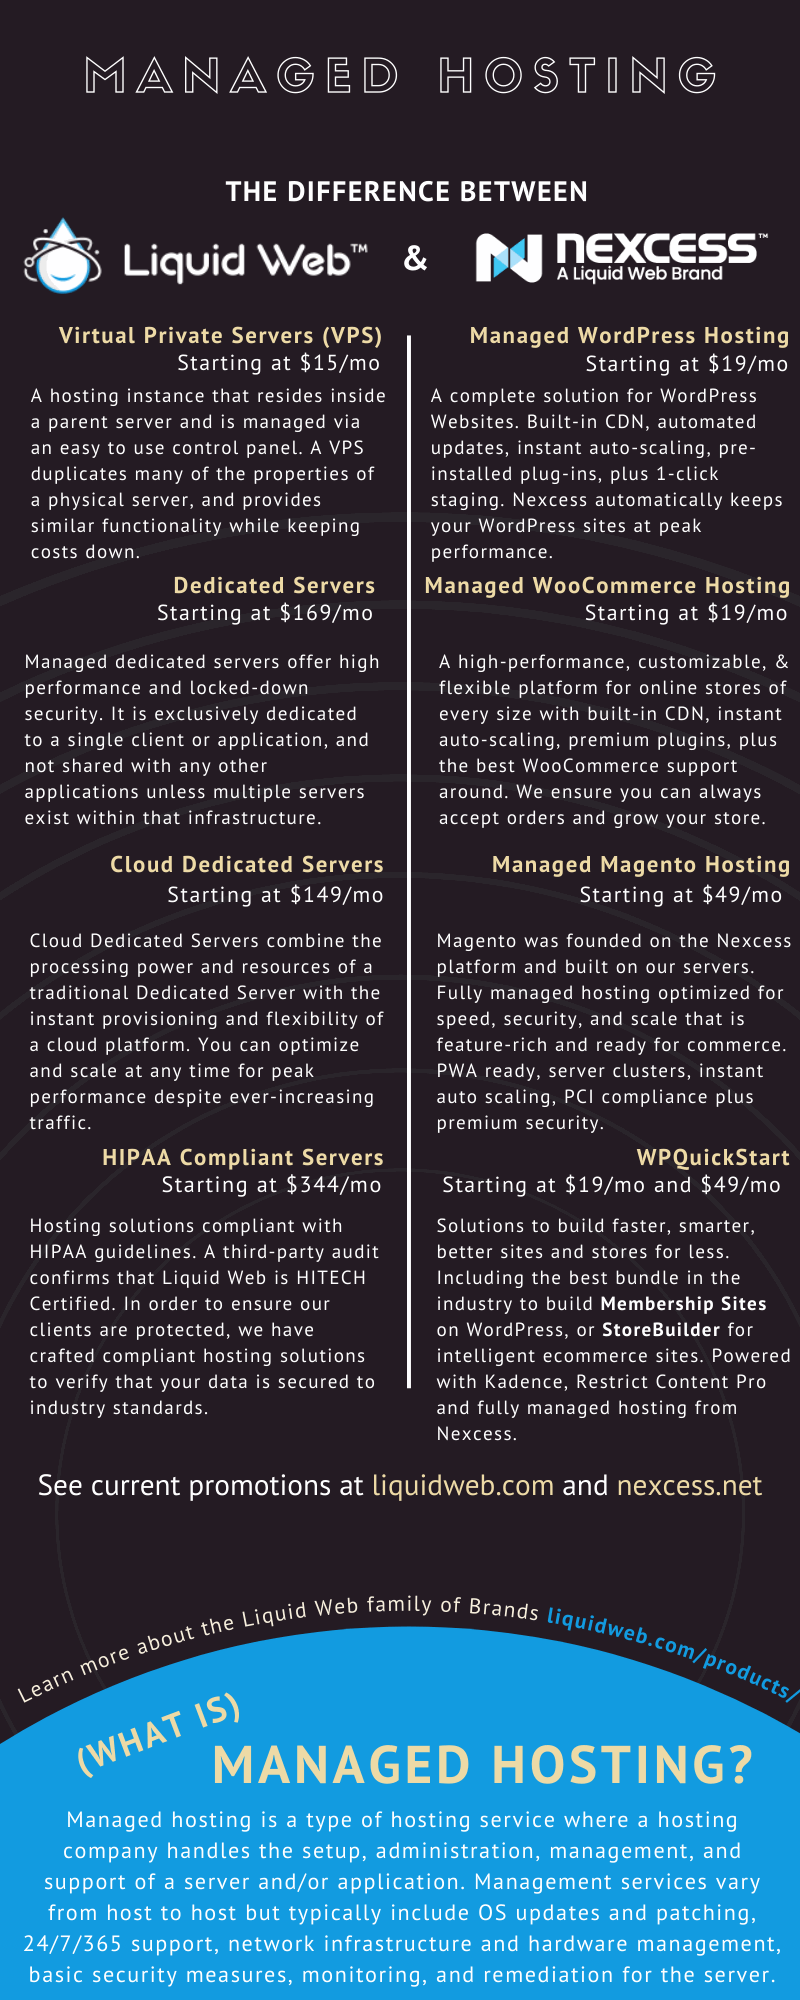  Managed hosting - Liquid Web and Nexcess compared